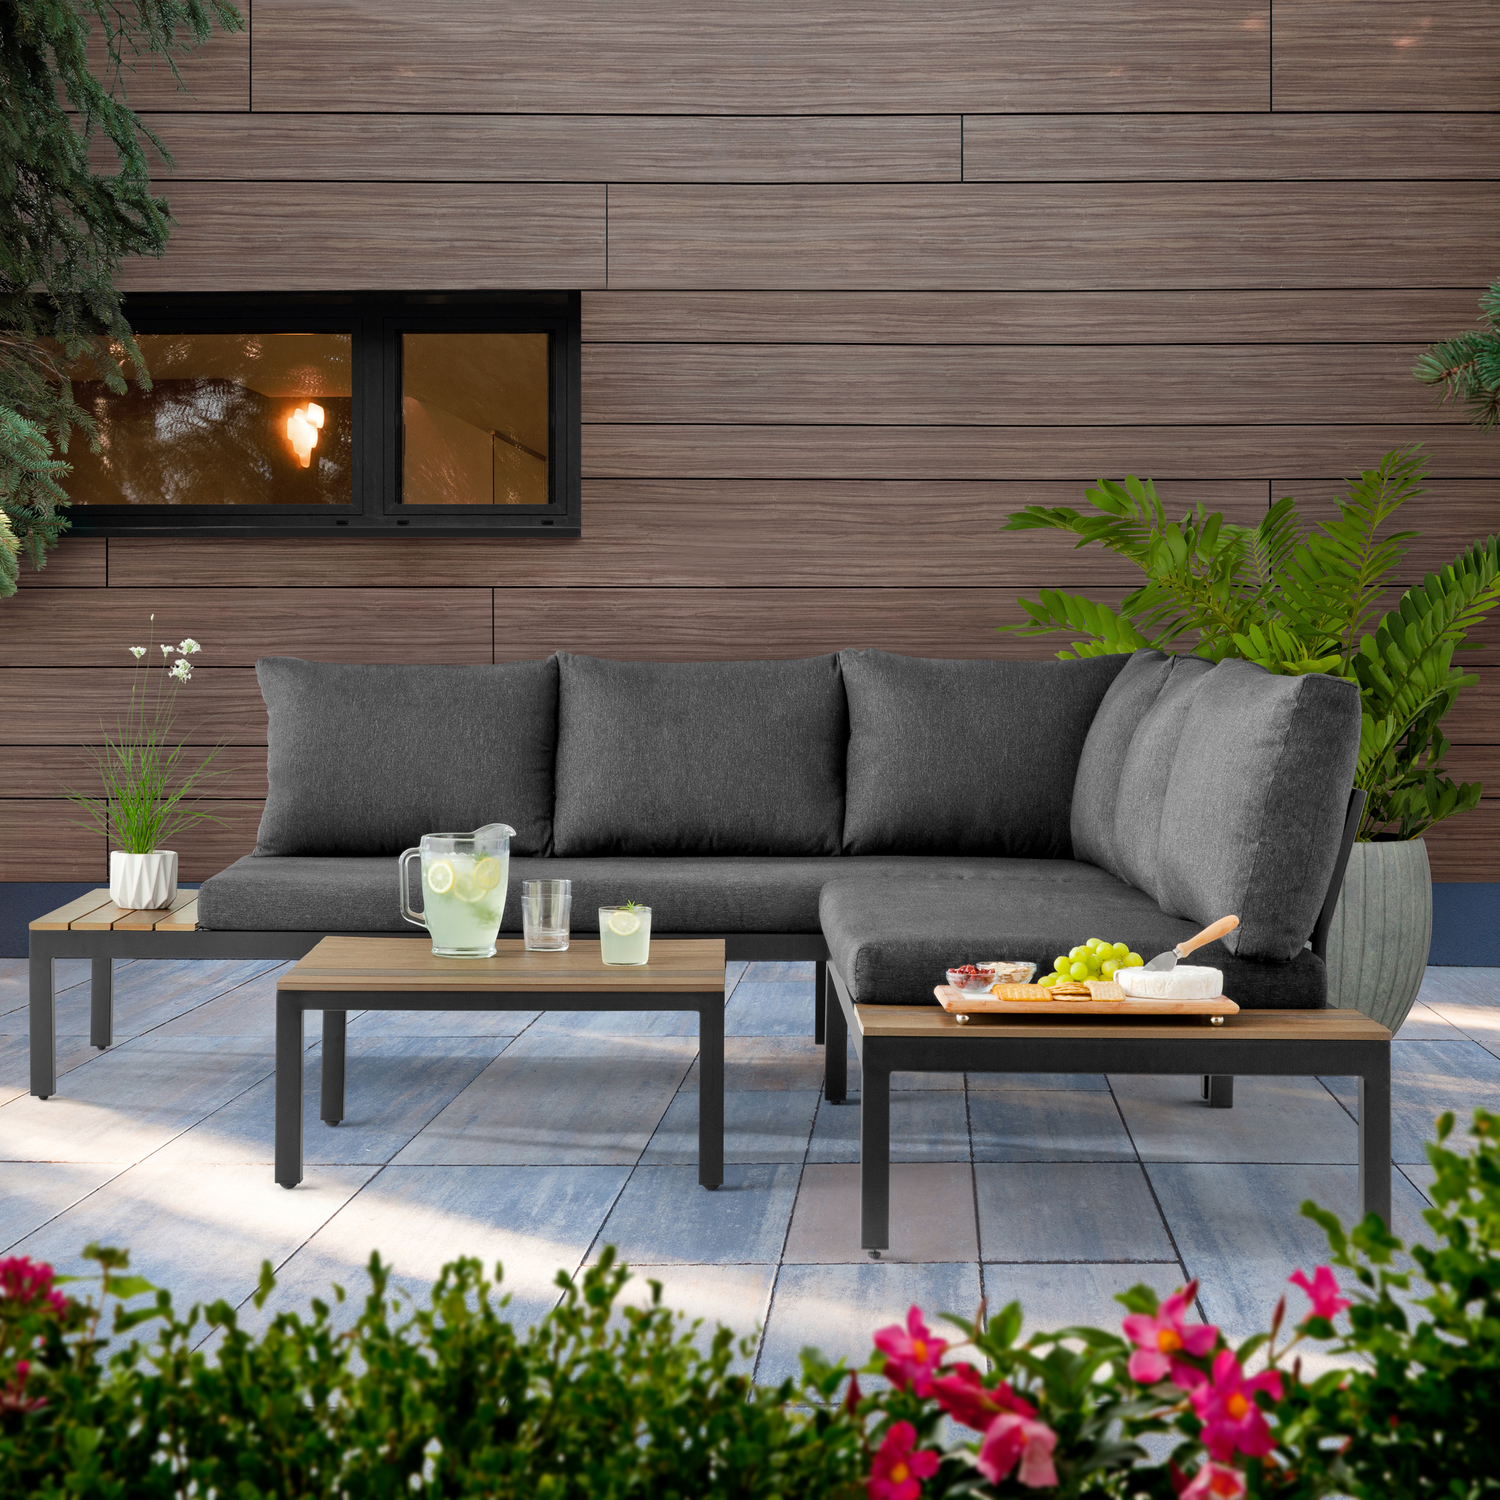 Walmart, Better Homes & Gardens Bryde Sectional Sofa and Loveseat Low Seating Patio Set, 3 Pieces,  YMMV, $299